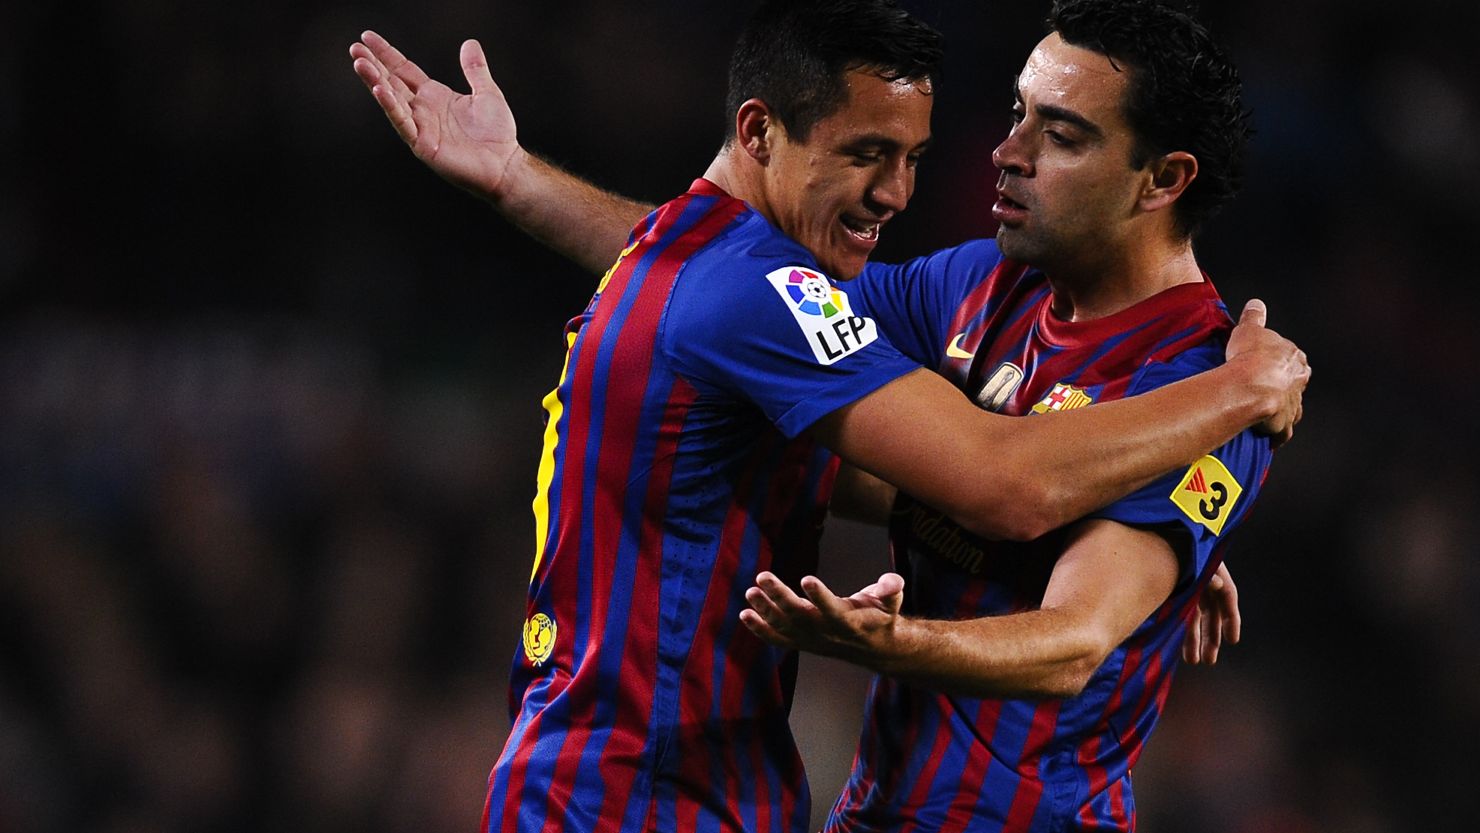 Alexis Sanchez of Barcelona celebrates with his teammate Xavi Hernandez after scoring the opener in the Nou Camp.